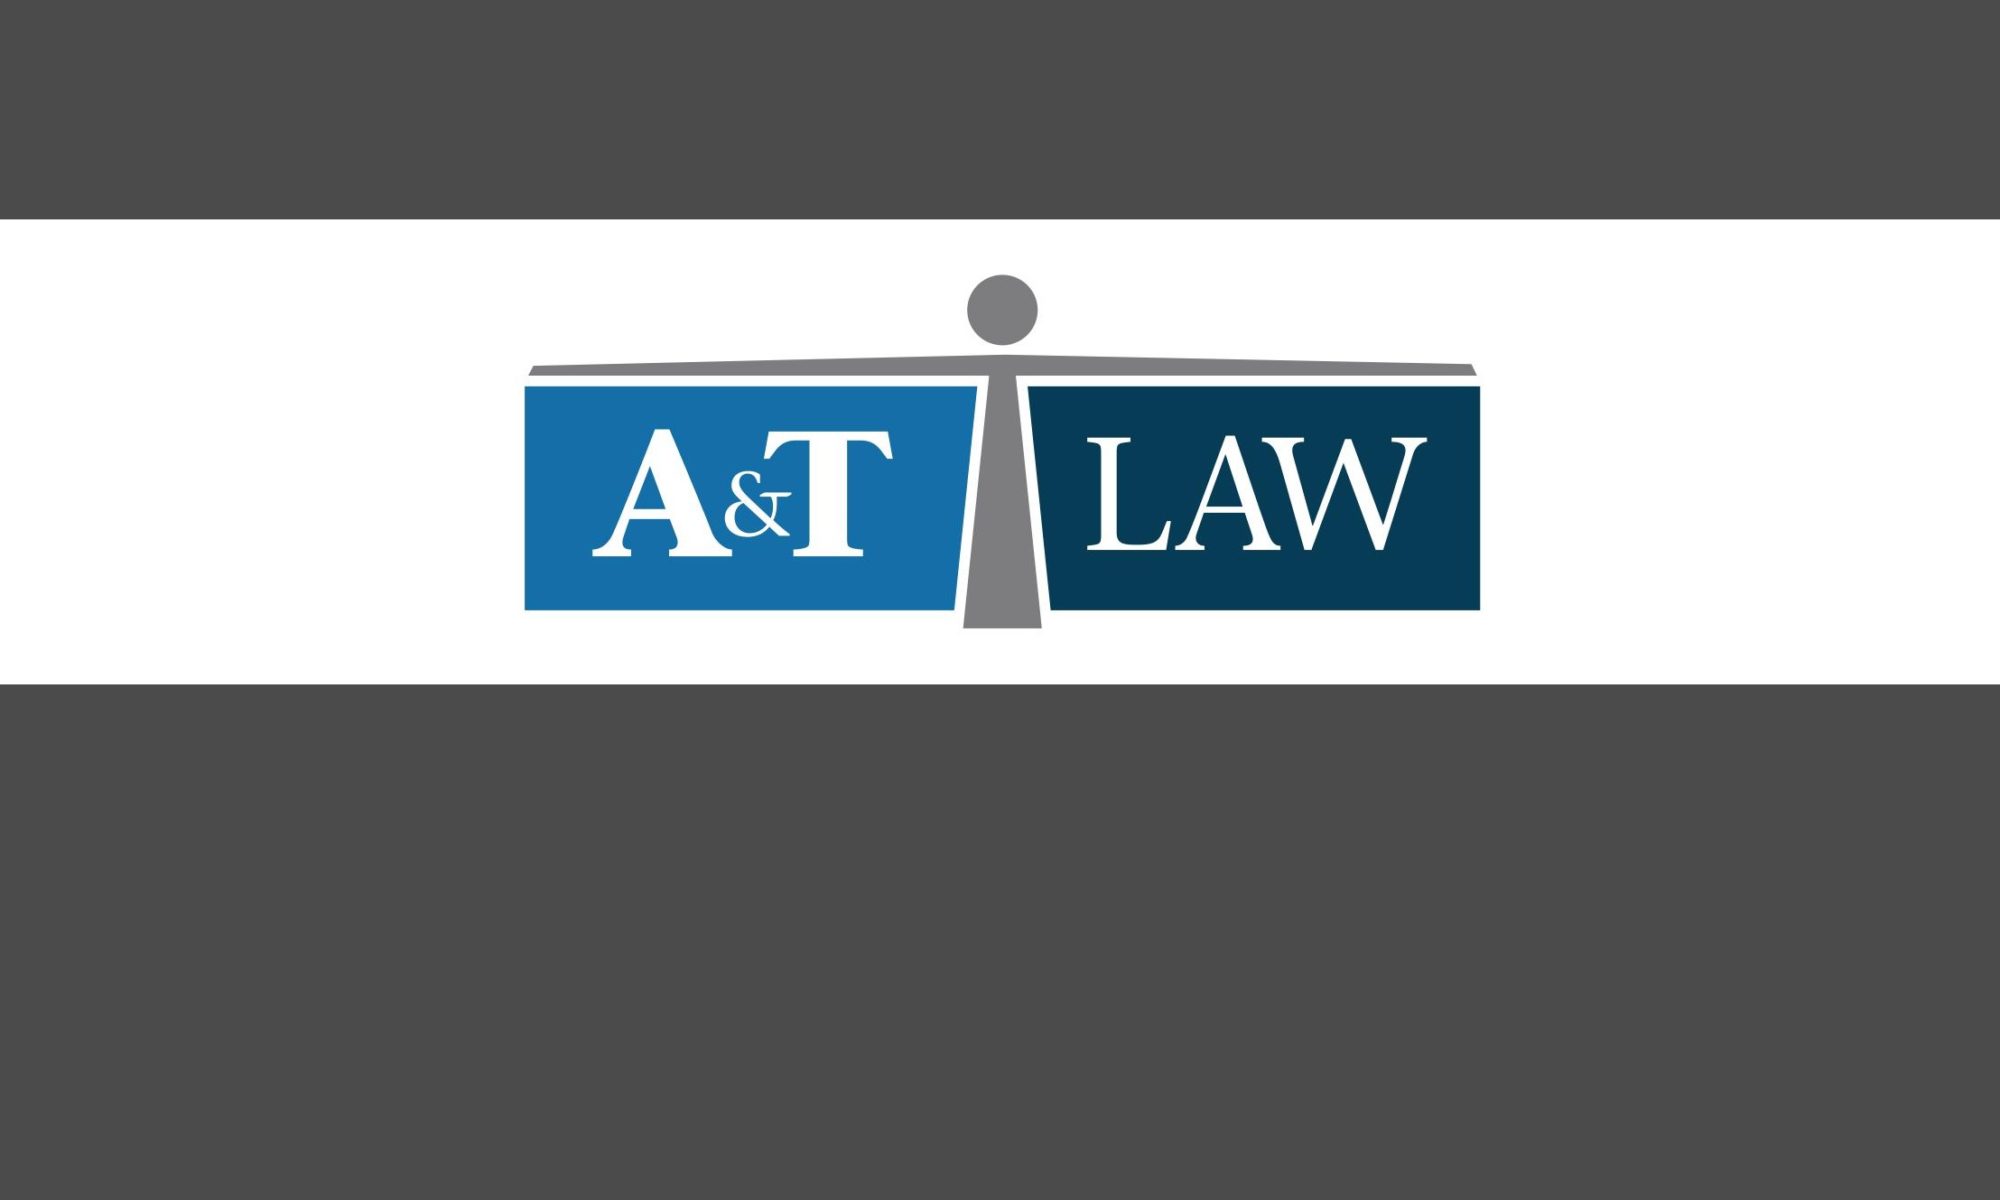 A&T International Legal Consultant